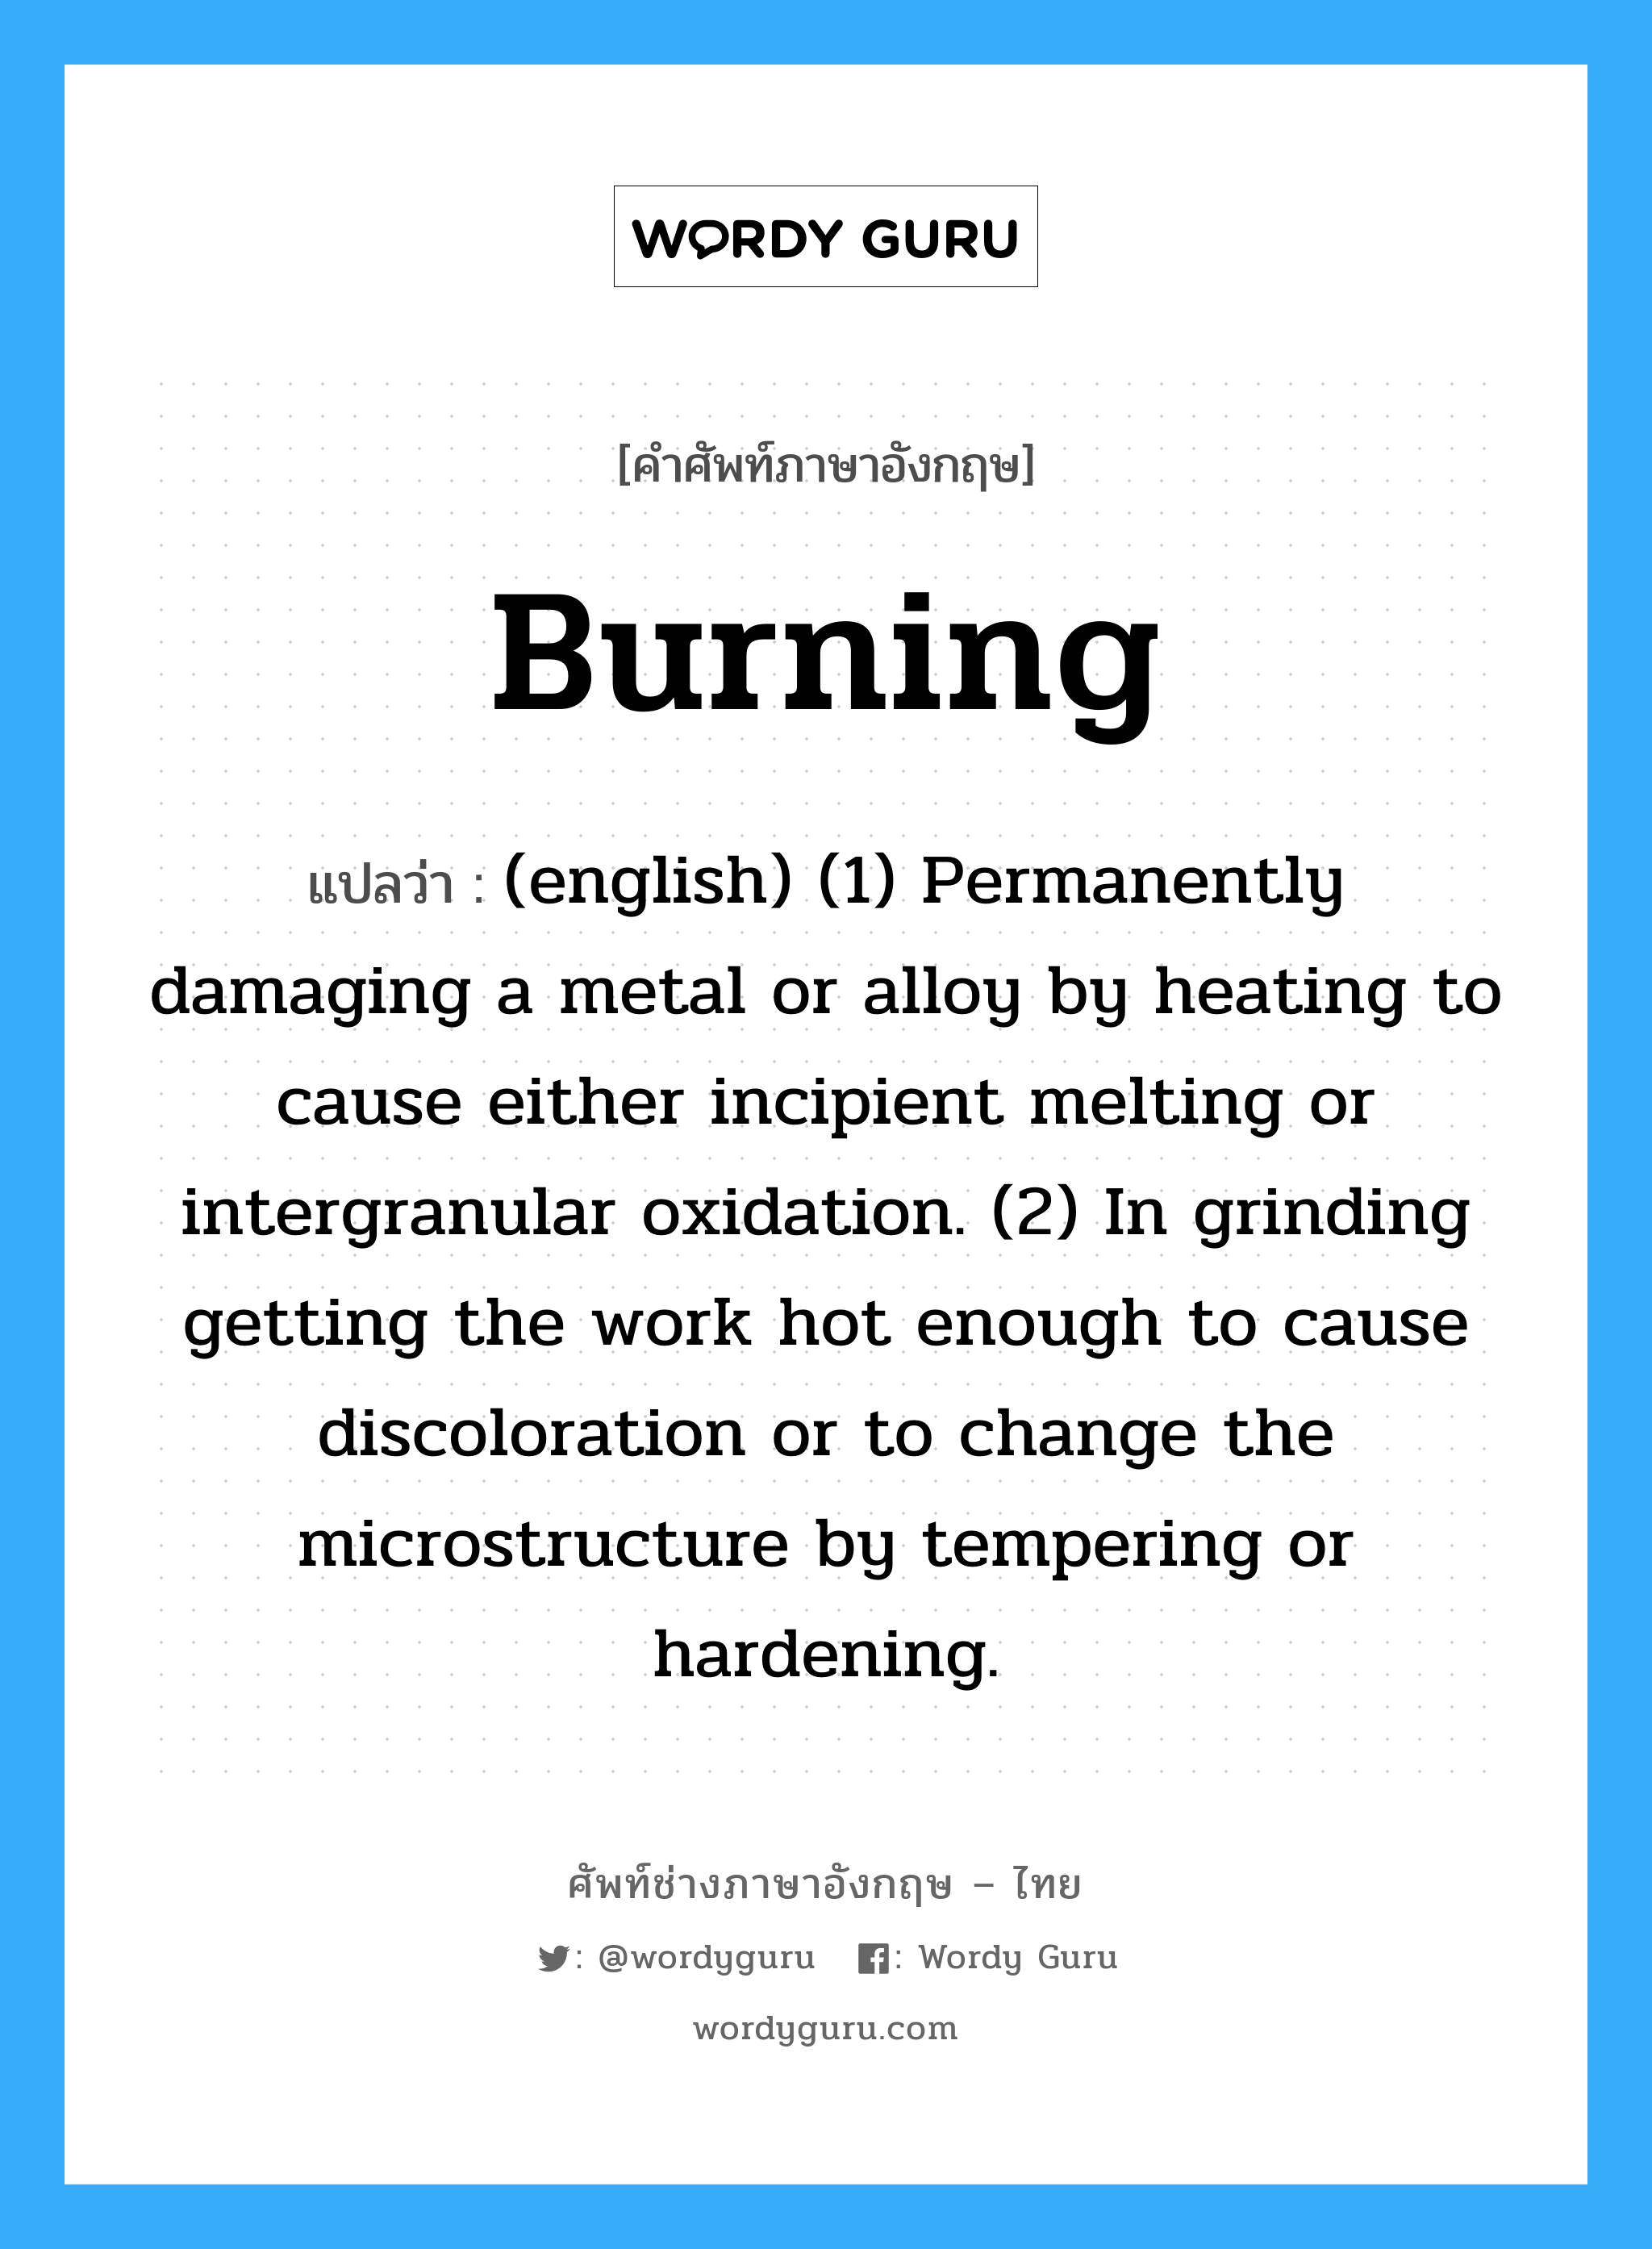 Burning แปลว่า?, คำศัพท์ช่างภาษาอังกฤษ - ไทย Burning คำศัพท์ภาษาอังกฤษ Burning แปลว่า (english) (1) Permanently damaging a metal or alloy by heating to cause either incipient melting or intergranular oxidation. (2) In grinding getting the work hot enough to cause discoloration or to change the microstructure by tempering or hardening.